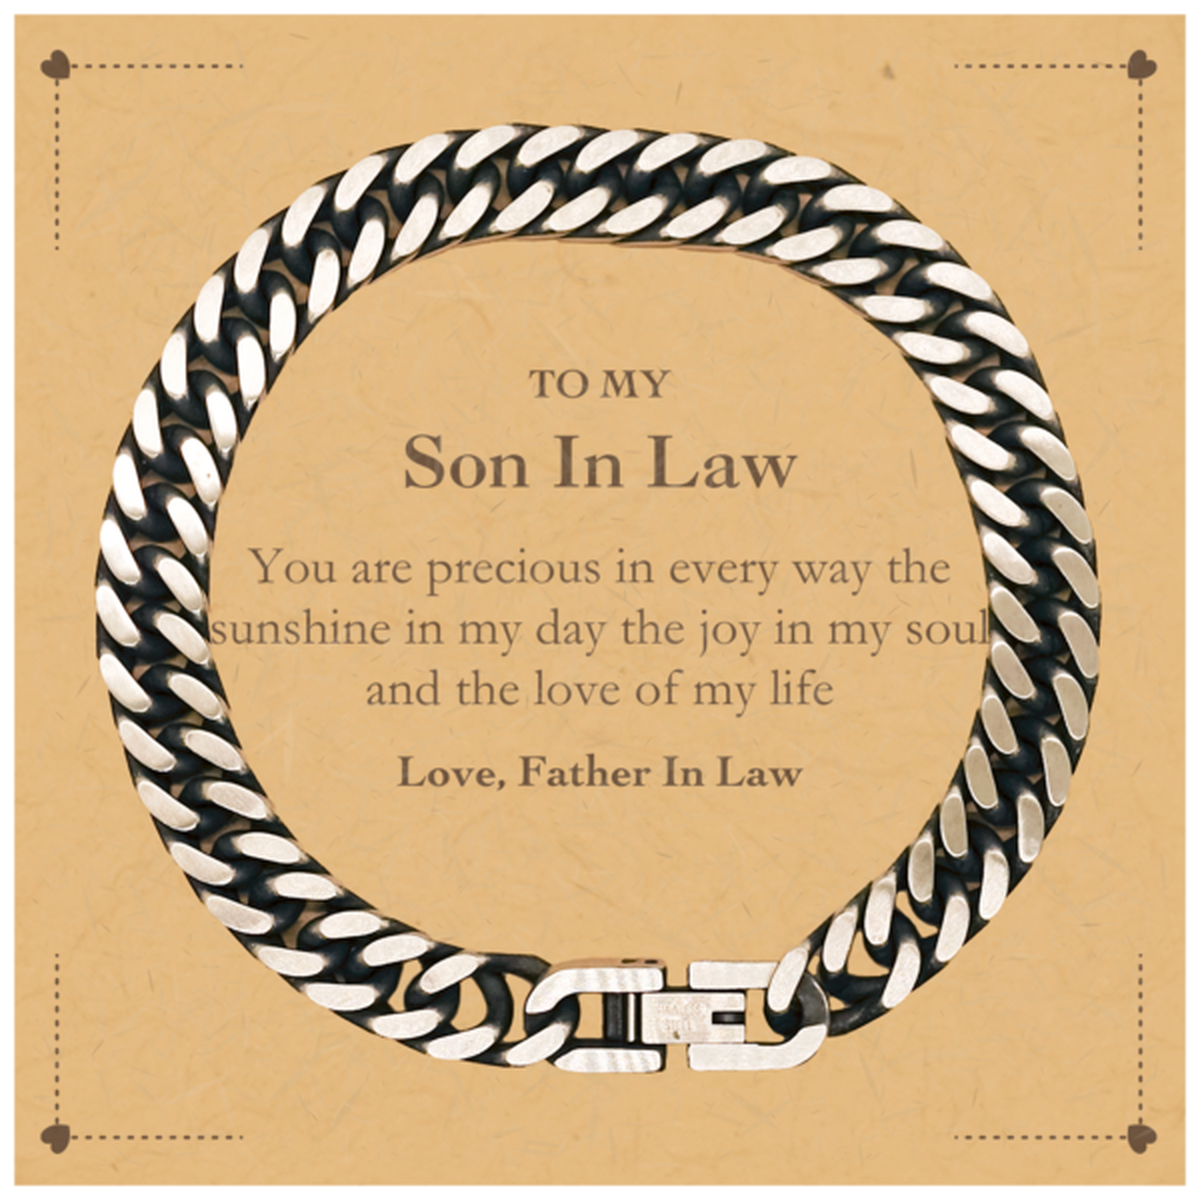 Graduation Gifts for Son In Law Cuban Link Chain Bracelet Present from Father In Law, Christmas Son In Law Birthday Gifts Son In Law You are precious in every way the sunshine in my day. Love, Father In Law